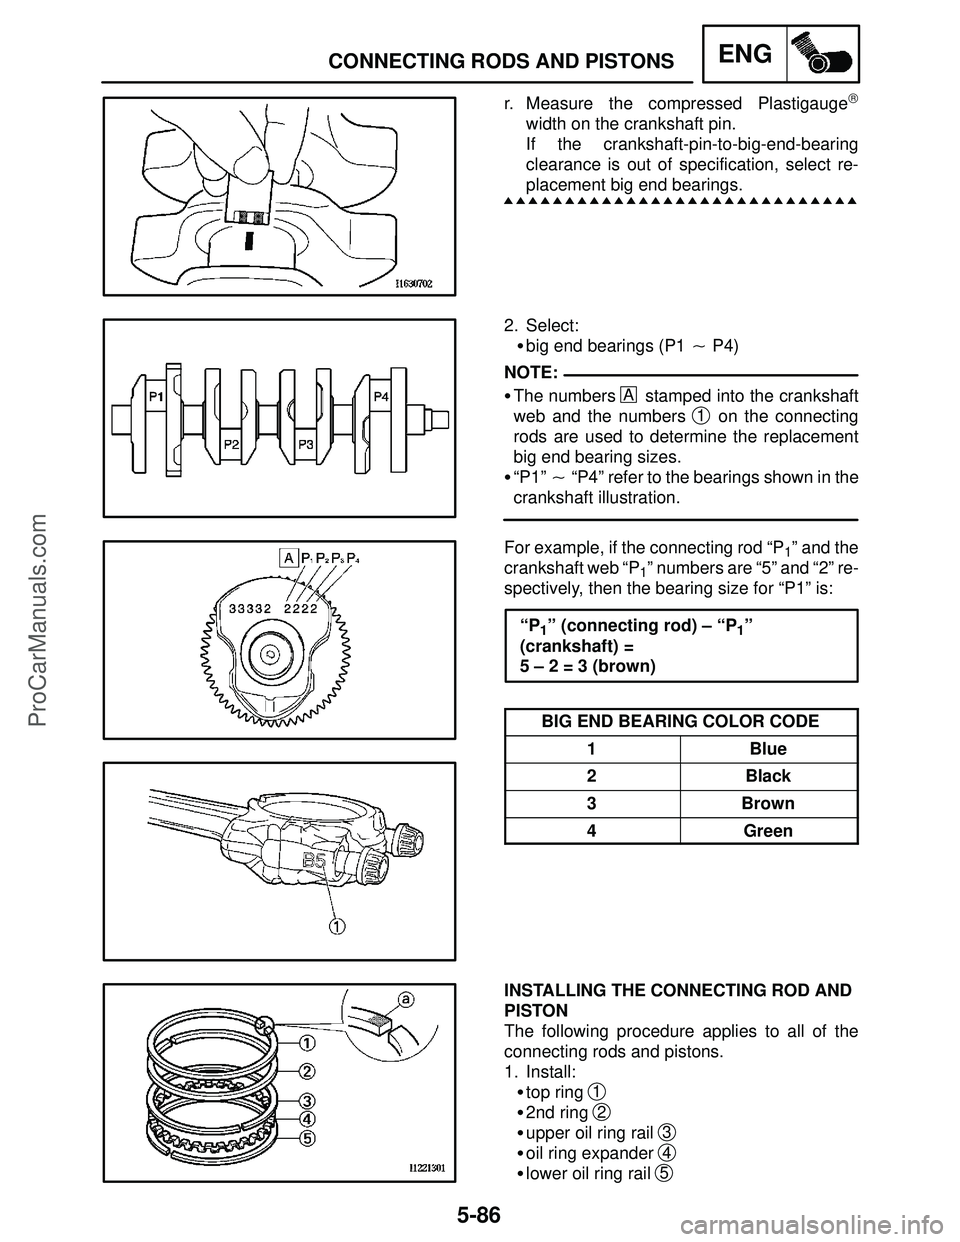 YAMAHA YZF-R1S 2004  Service Manual 5-86
CONNECTING RODS AND PISTONSENG
NOTE:
r. Measure the compressed Plastigauge
width on the crankshaft pin.
If the crankshaft-pin-to-big-end-bearing
clearance is out of specification, select re-
p